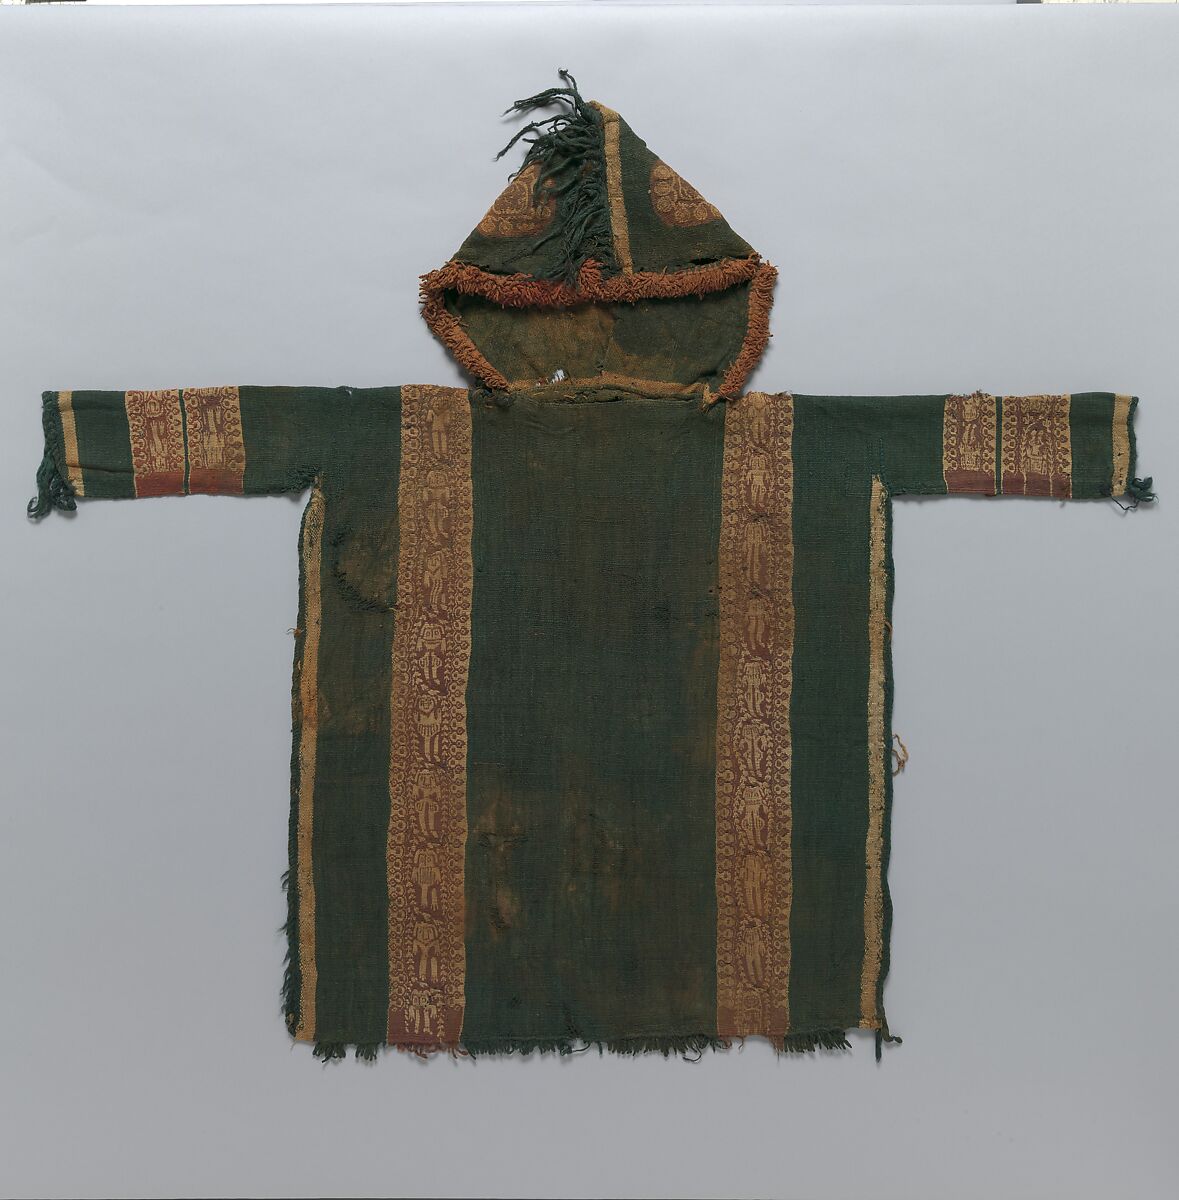 Child's Tunic with Hood, Tapestry weave in purple-colored, red-brown, and undyed wool on plain-weave ground of green wool; fringes in green and red-brown along the perimeter of the hood and lower edges 